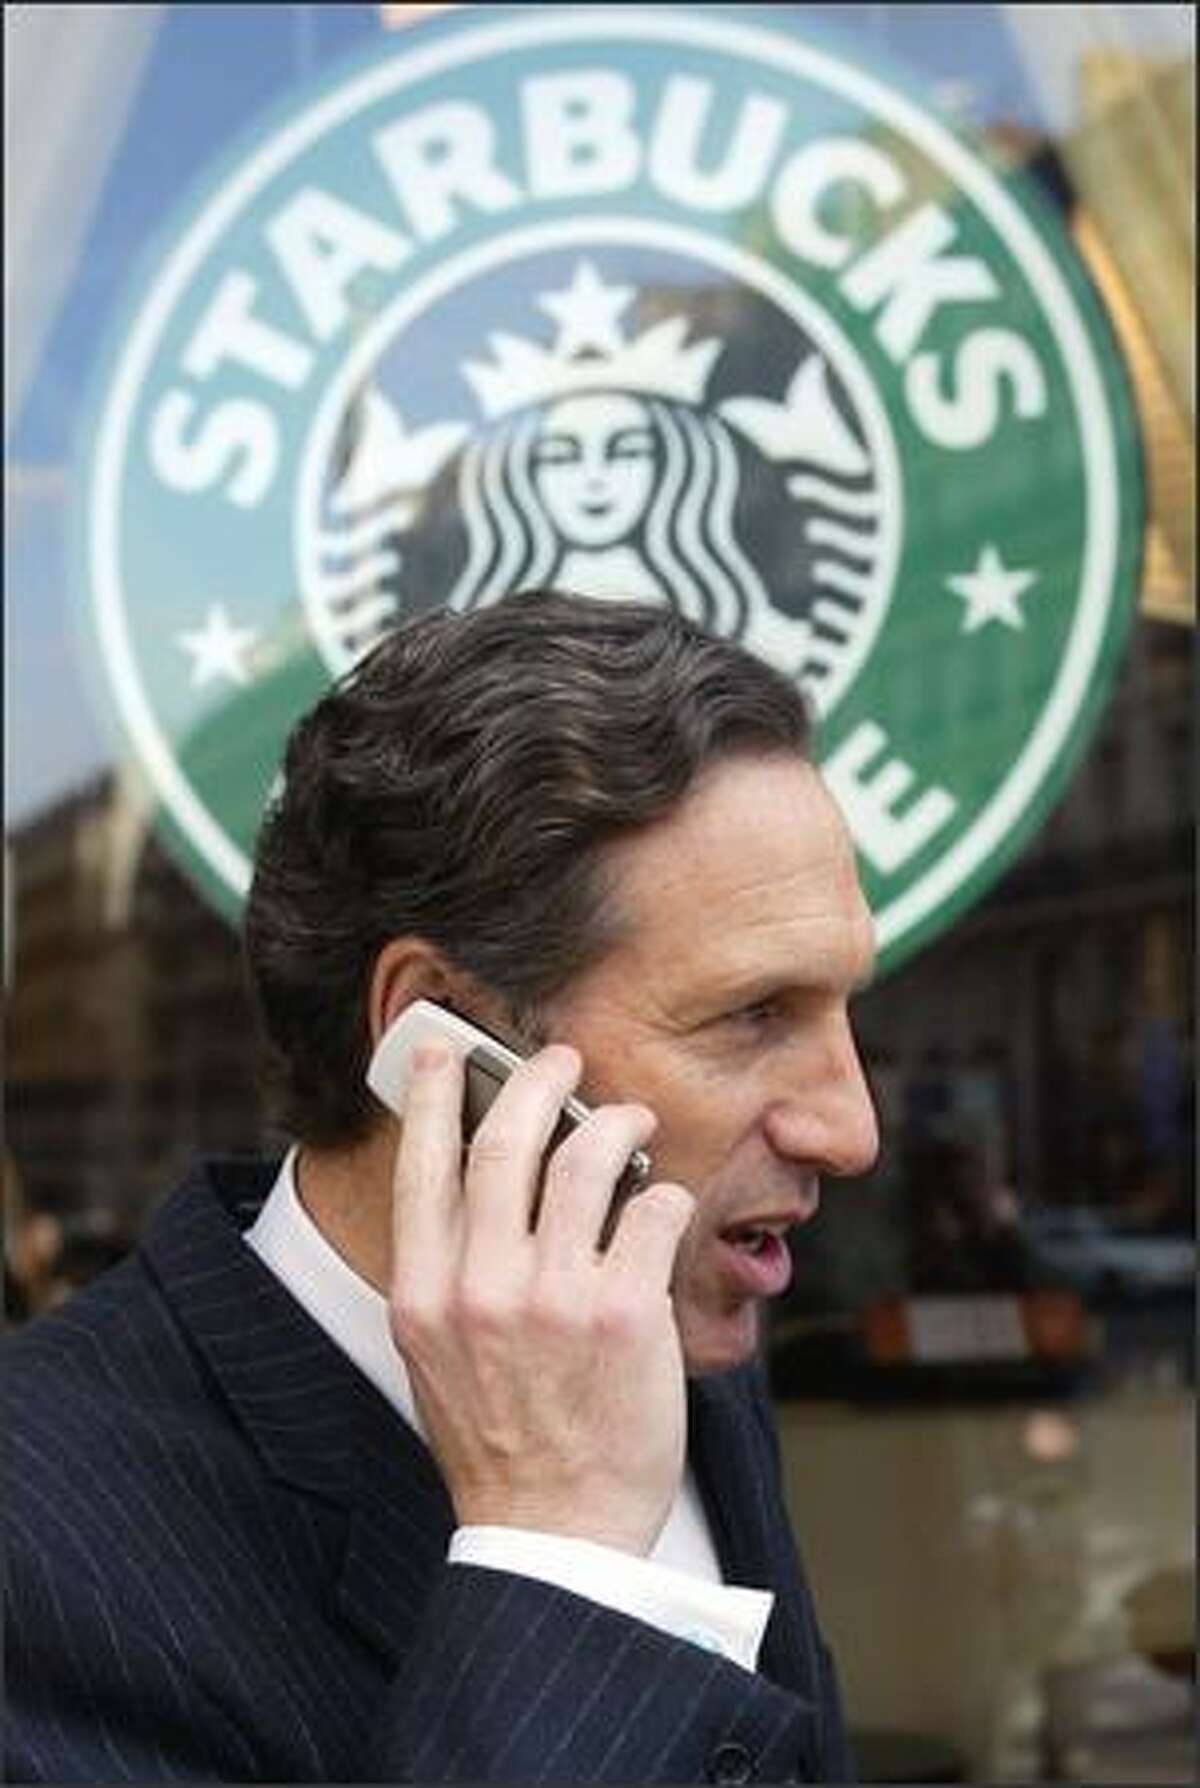 Starbucks chairman Howard Schultz led the state's executives in shareholder-paid perks -- along with $3.57 million in salary and bonuses.